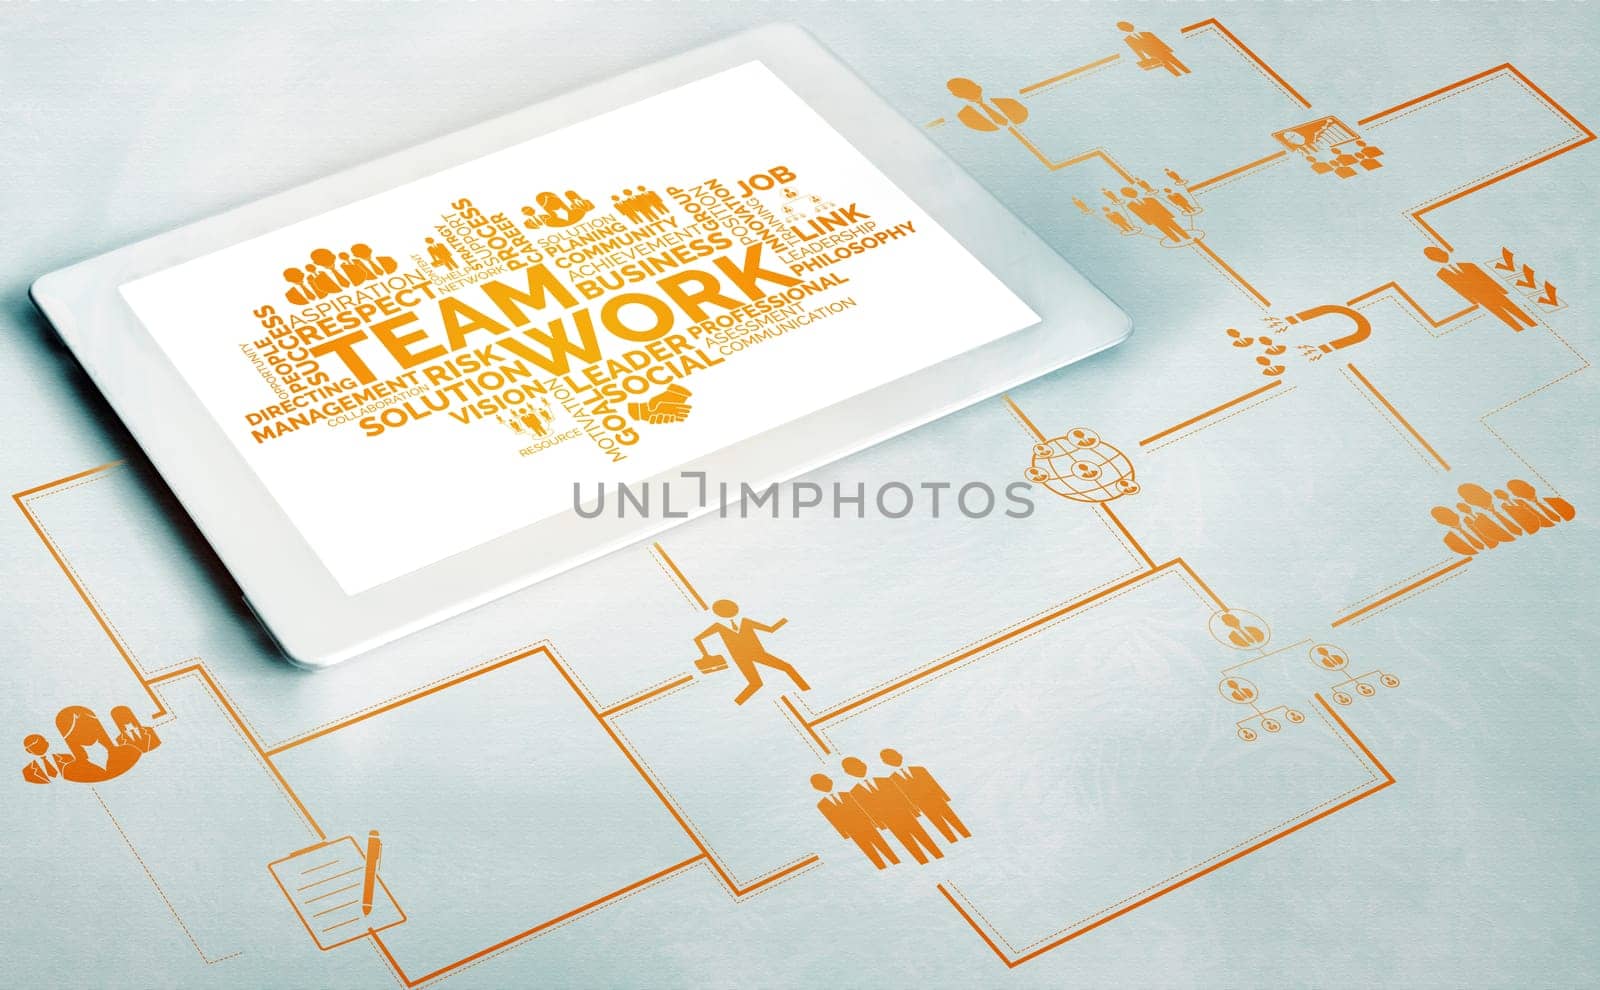 Human Resources and People Networking Concept by biancoblue